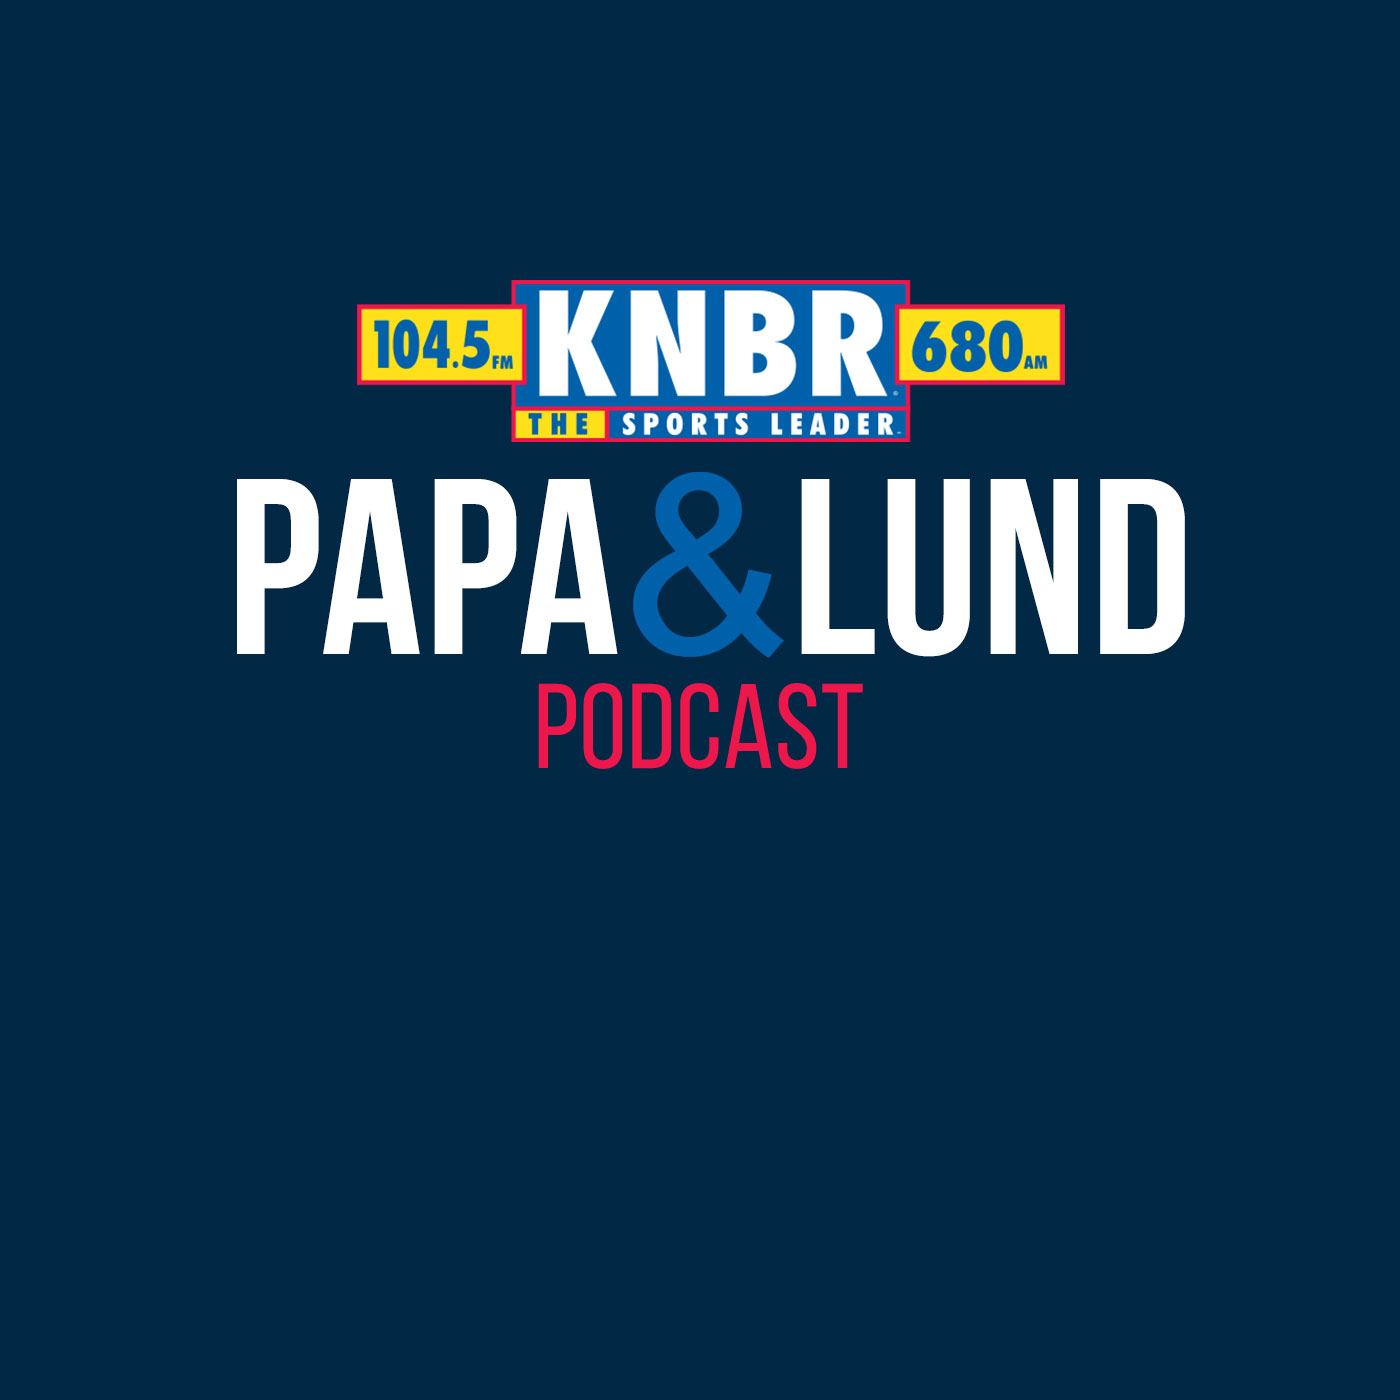 12-19 Dennis Brown joins Papa & Lund to discuss how the defense looked against the run in Arizona and how that translates to their upcoming game against the Ravens run game